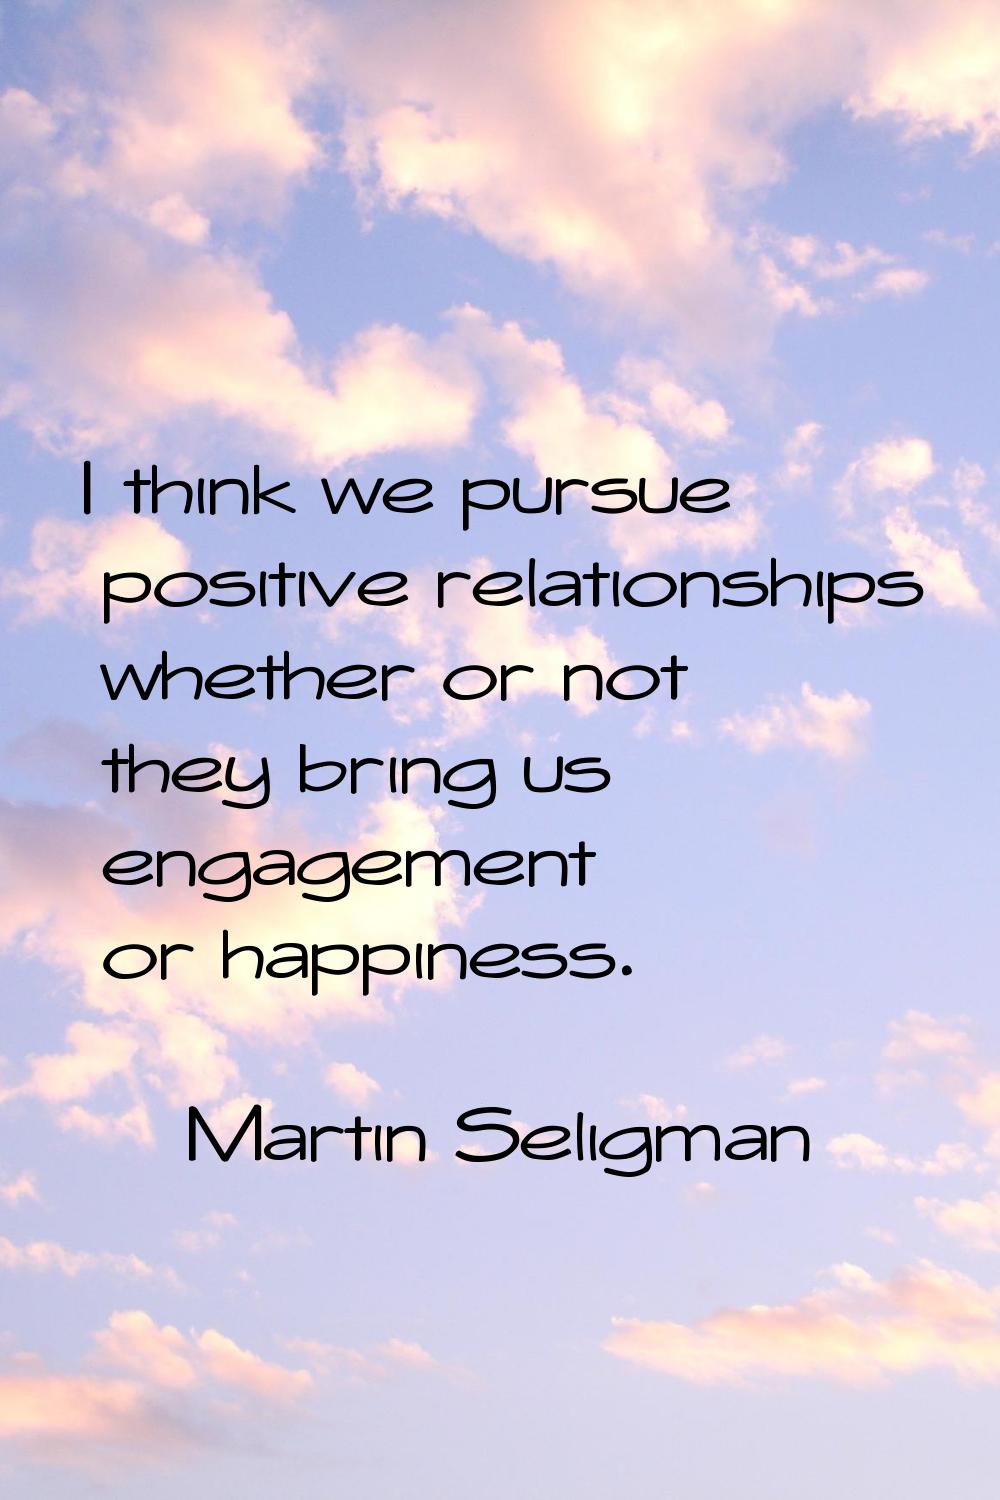 I think we pursue positive relationships whether or not they bring us engagement or happiness.